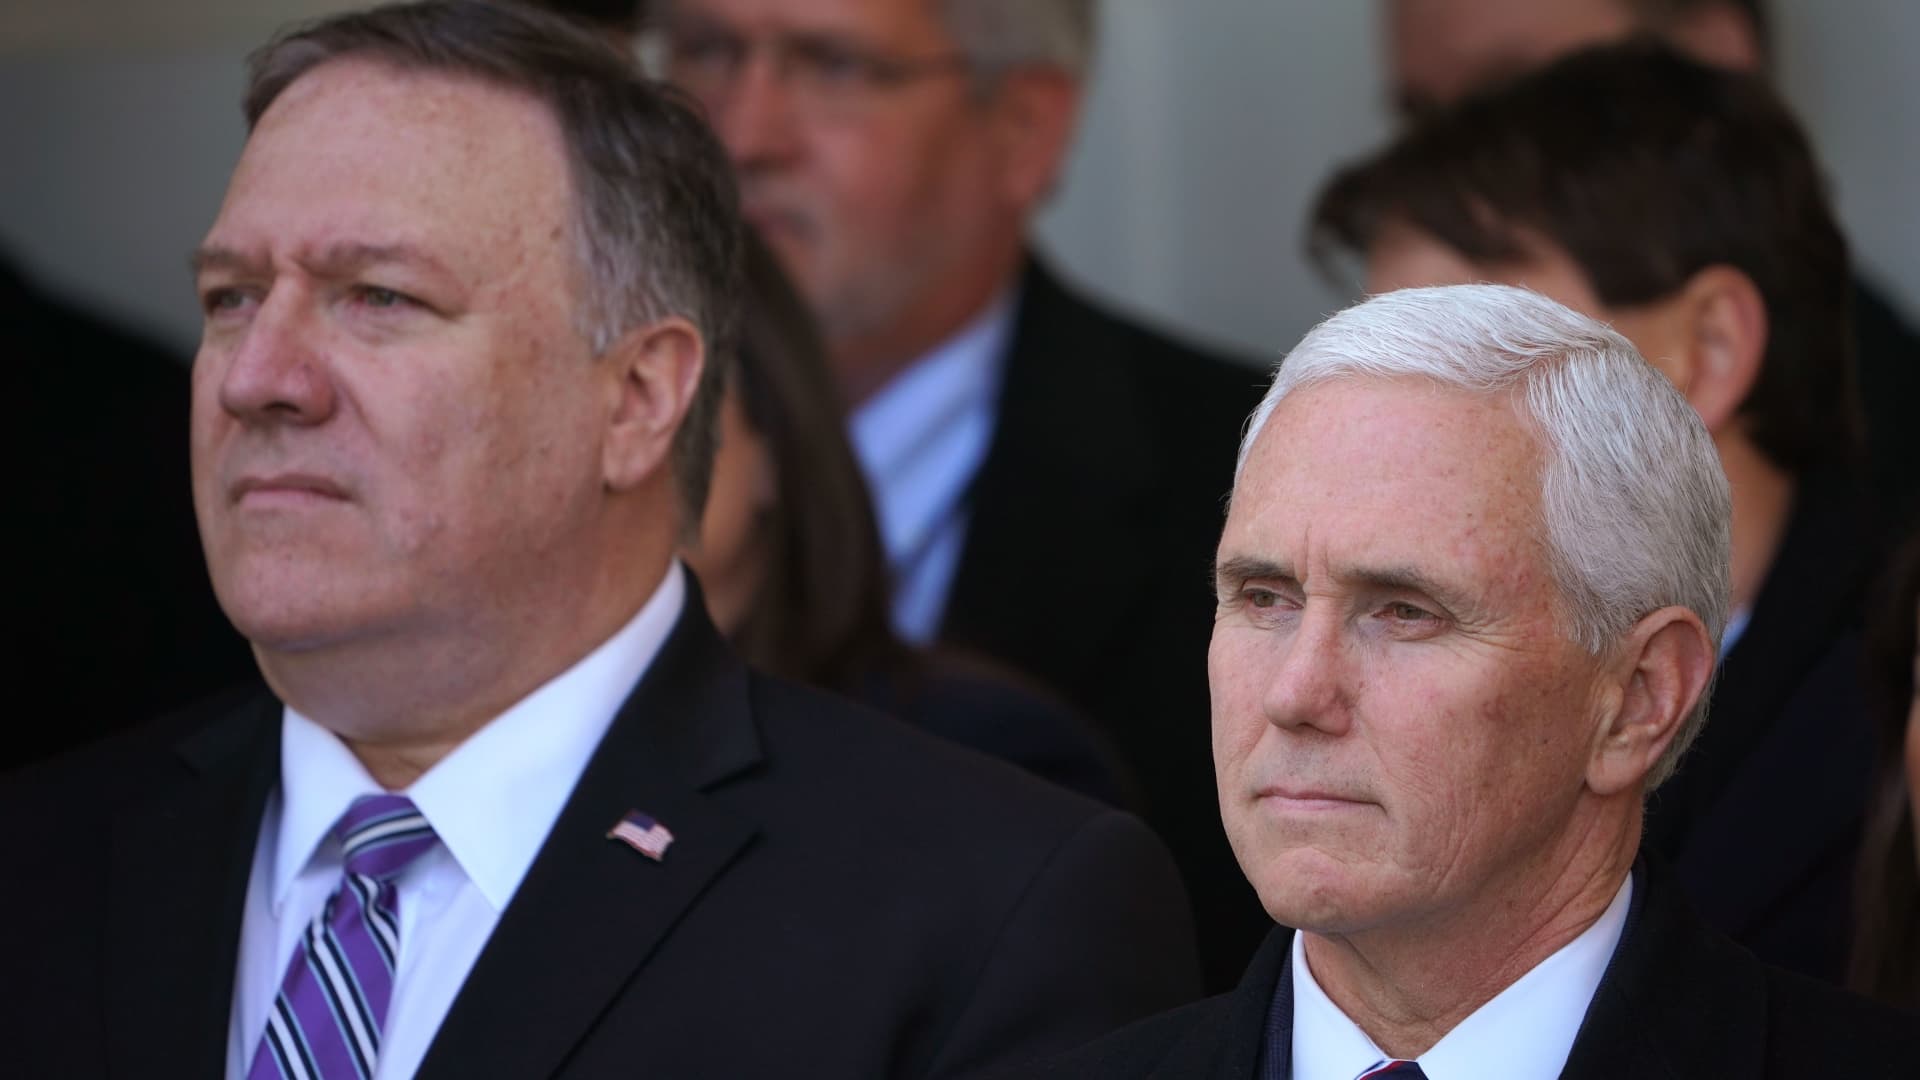 US Secretary of State Mike Pompeo (L) and Vice President Mike Pence listen as President Donald Trump speaks about the government shutdown on January 25, 2019, from the Rose Garden of the White House in Washington, DC. - Trump says will sign bill to reopen the government until February 15.